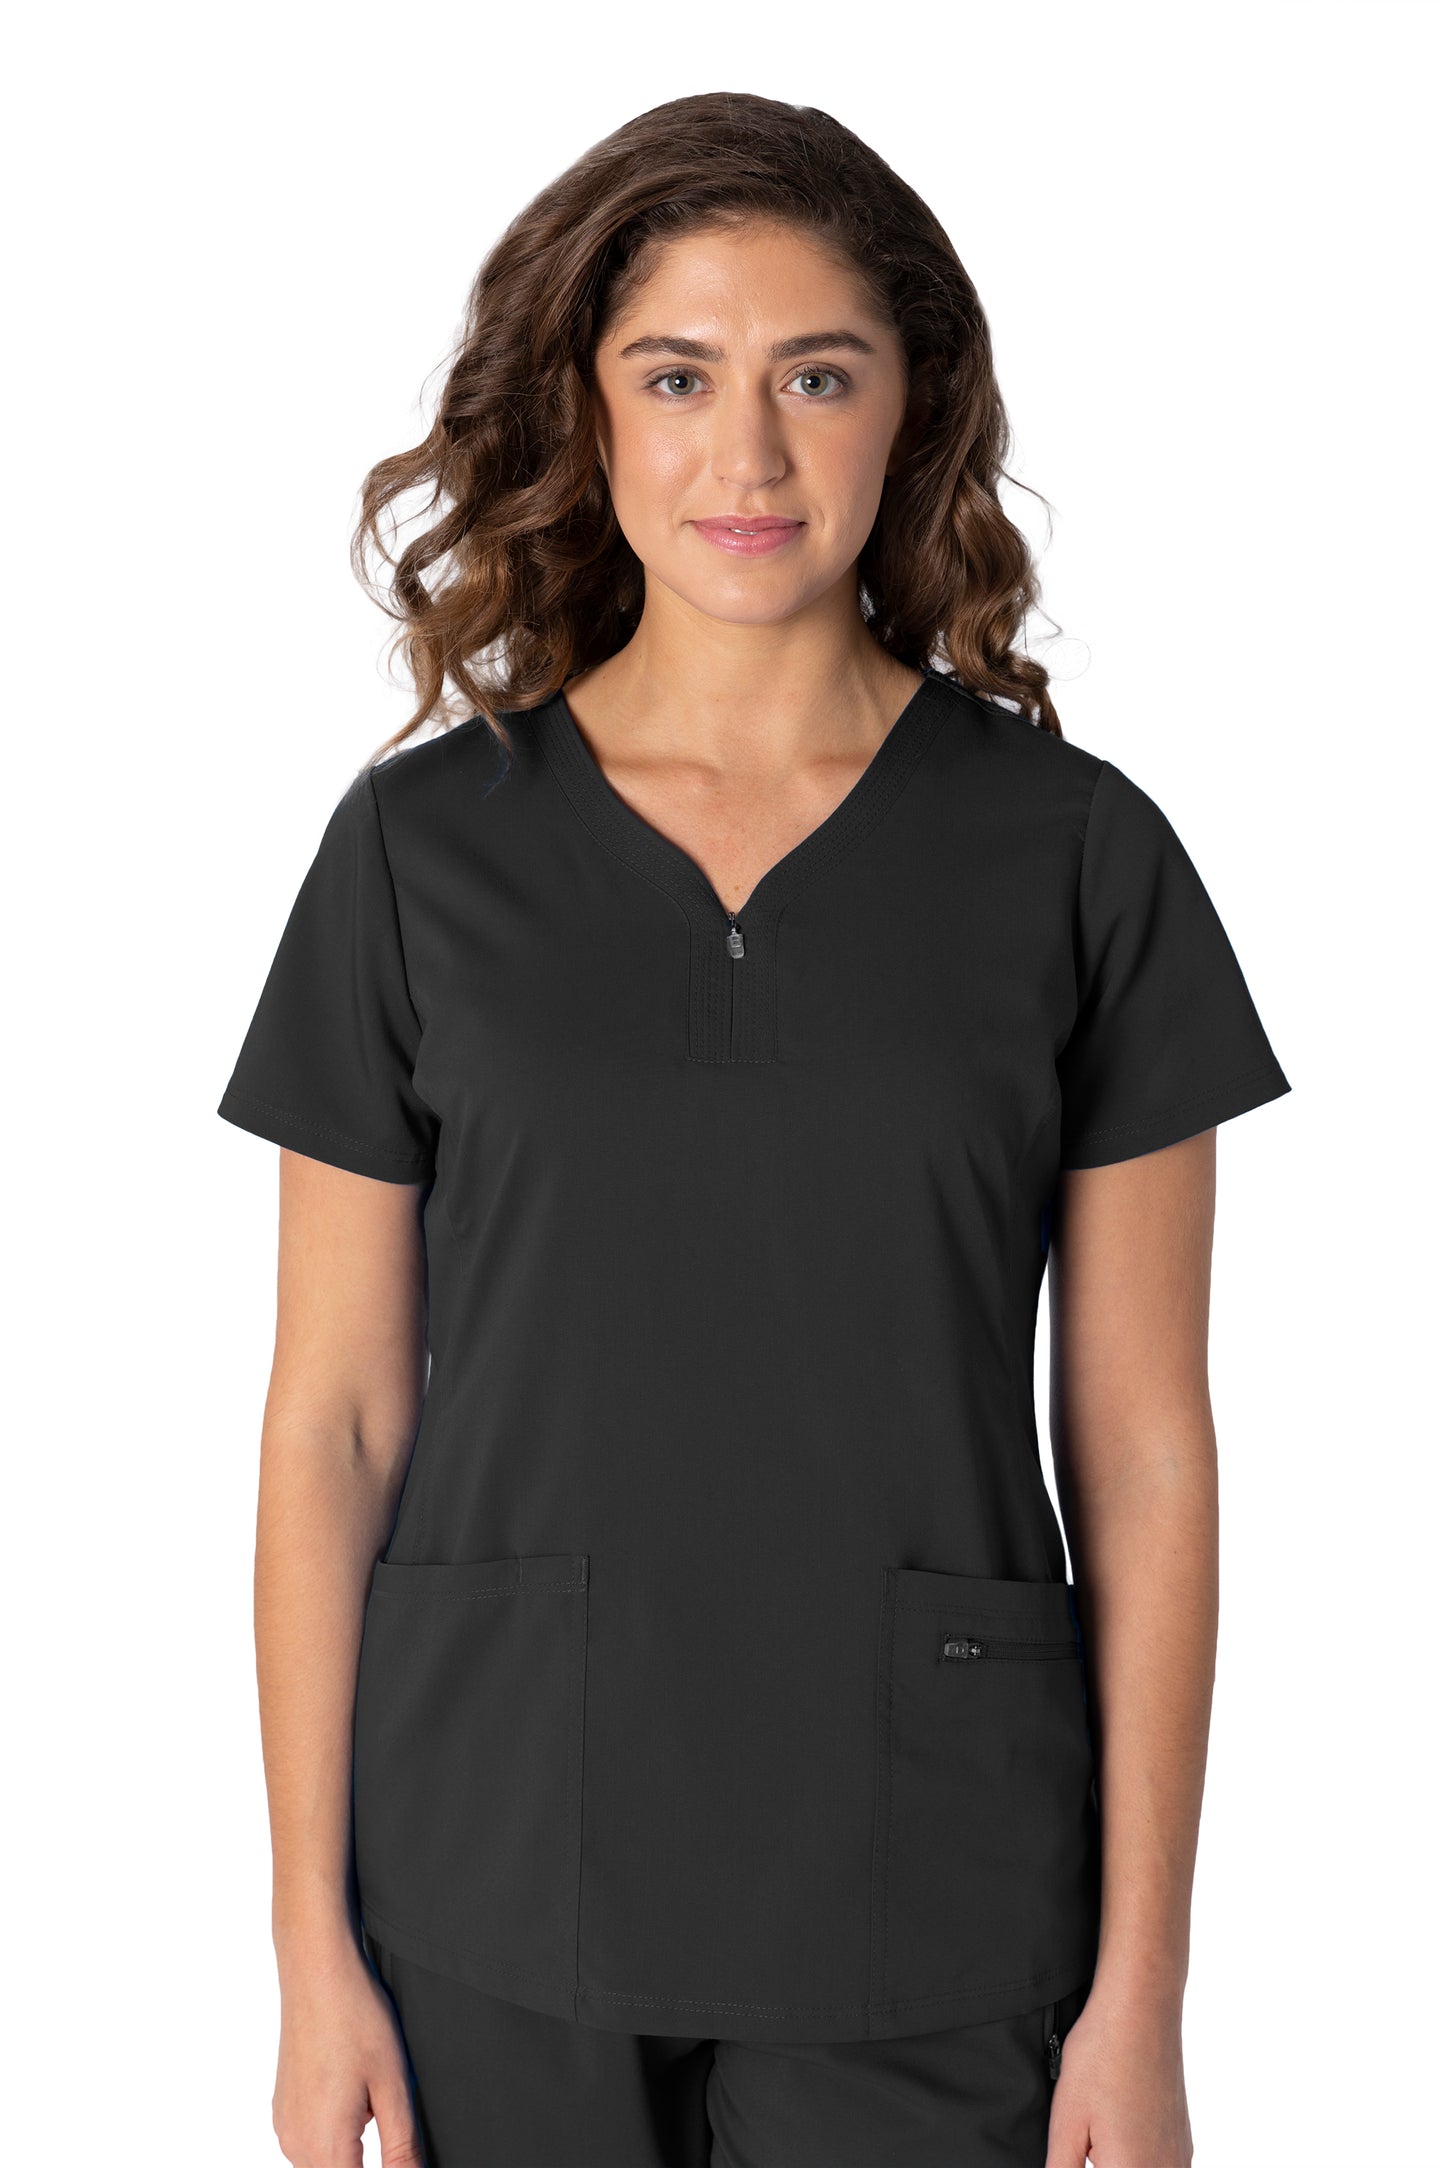 Healing Hands Purple Label Jeni Scrub Top in Black at Parker's Clothing and Shoes.